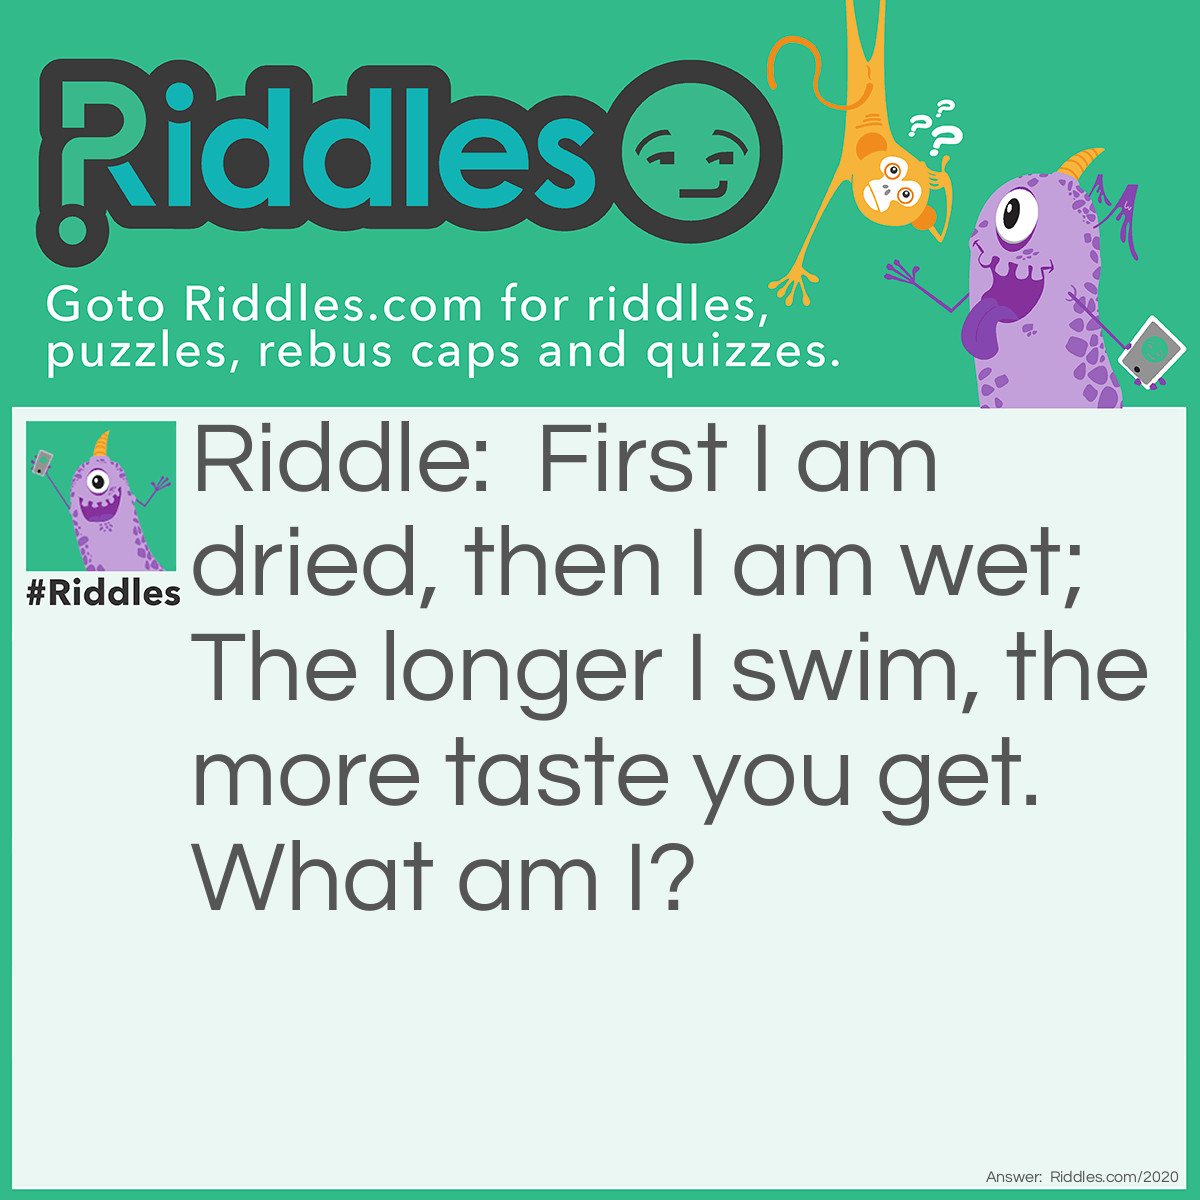 Riddle: First I am dried, then I am wet; 
The longer I swim, the more taste you get. 
What am I? Answer: Tea.